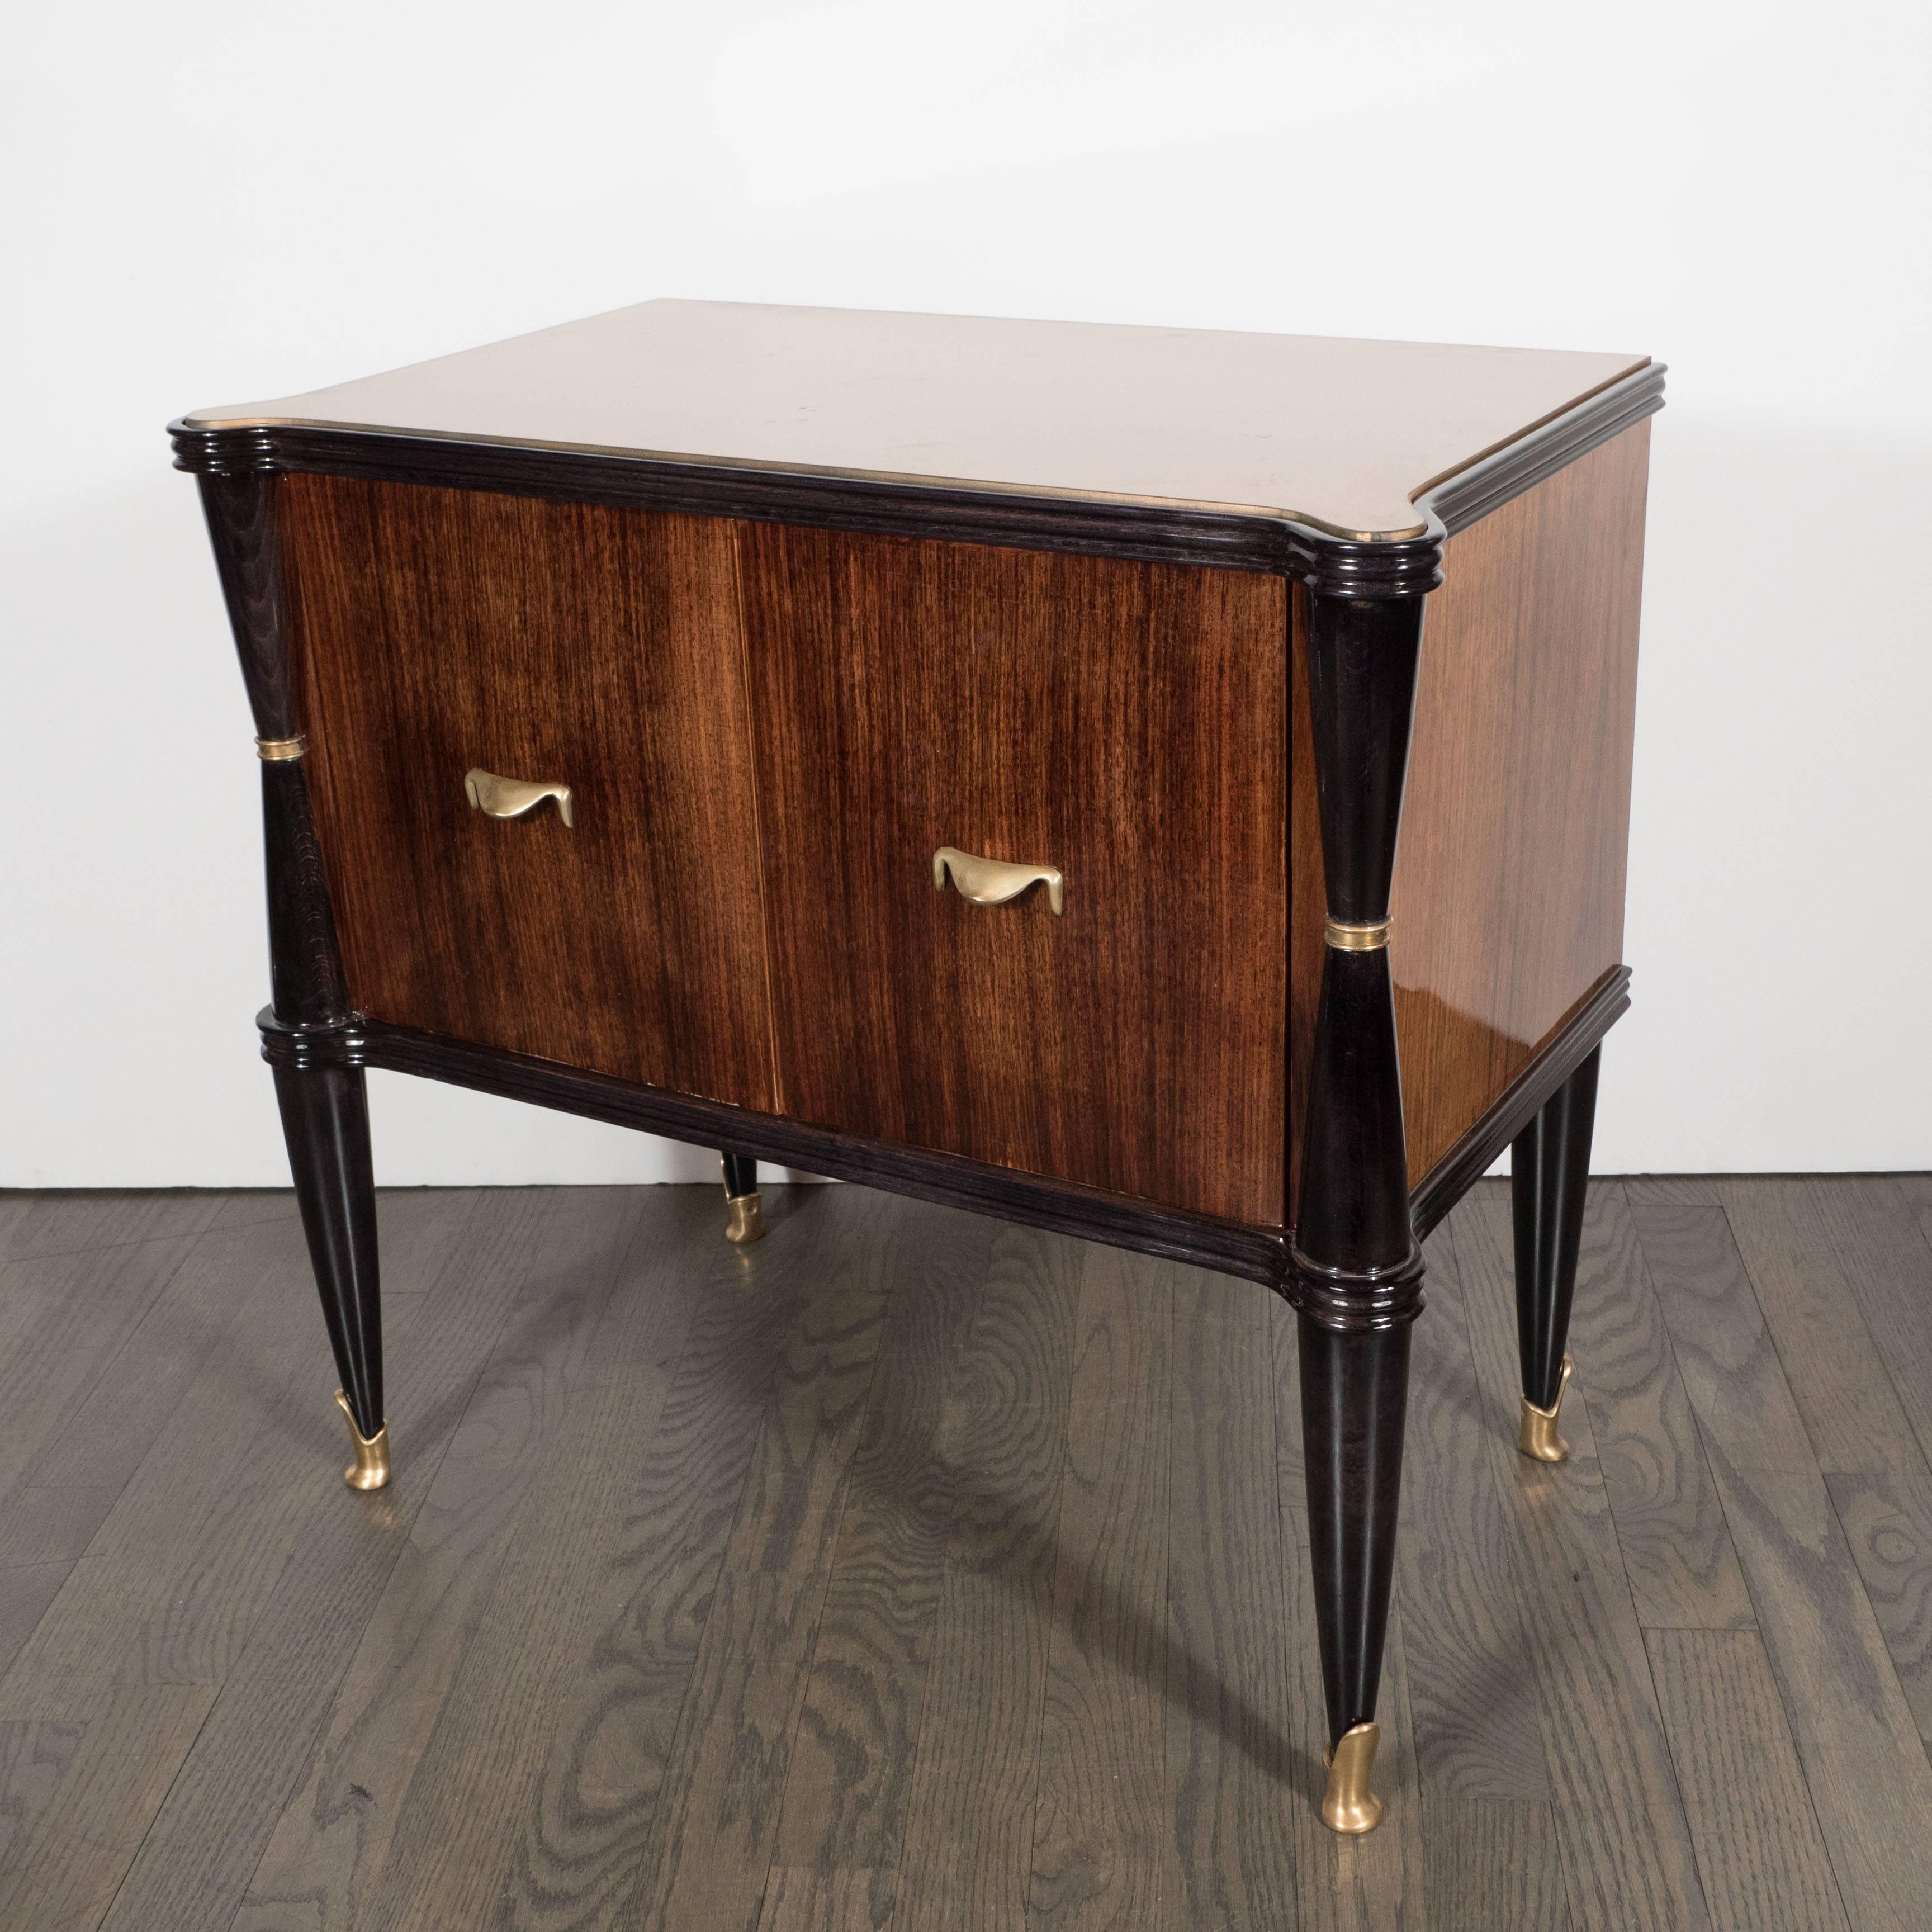 Brass Pair of Mid-Century Modernist Nightstands or End Tables in Rosewood and Gilt